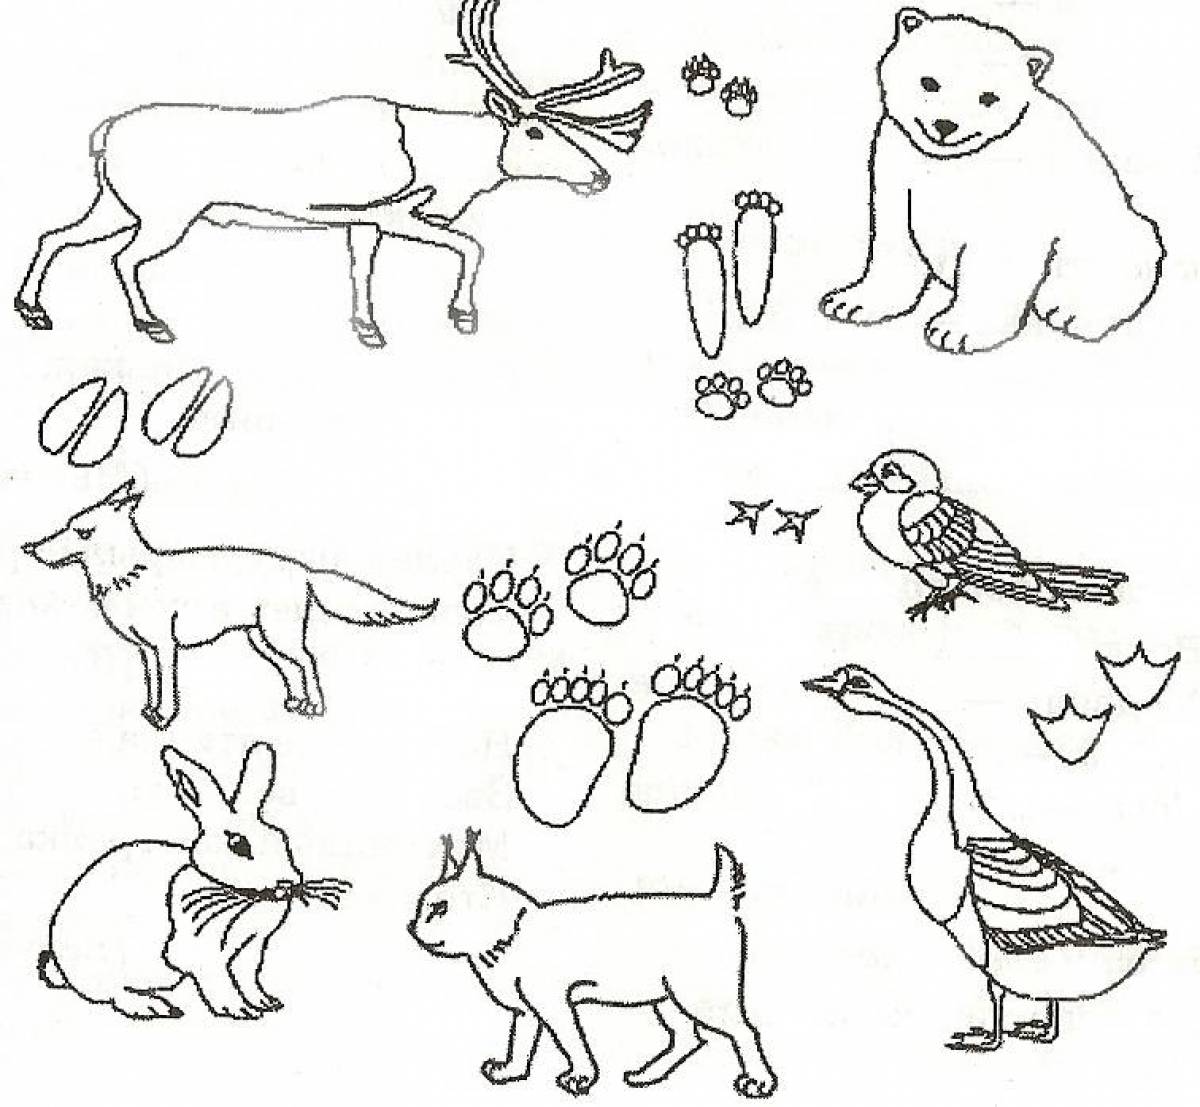 Awesome animal coloring pages